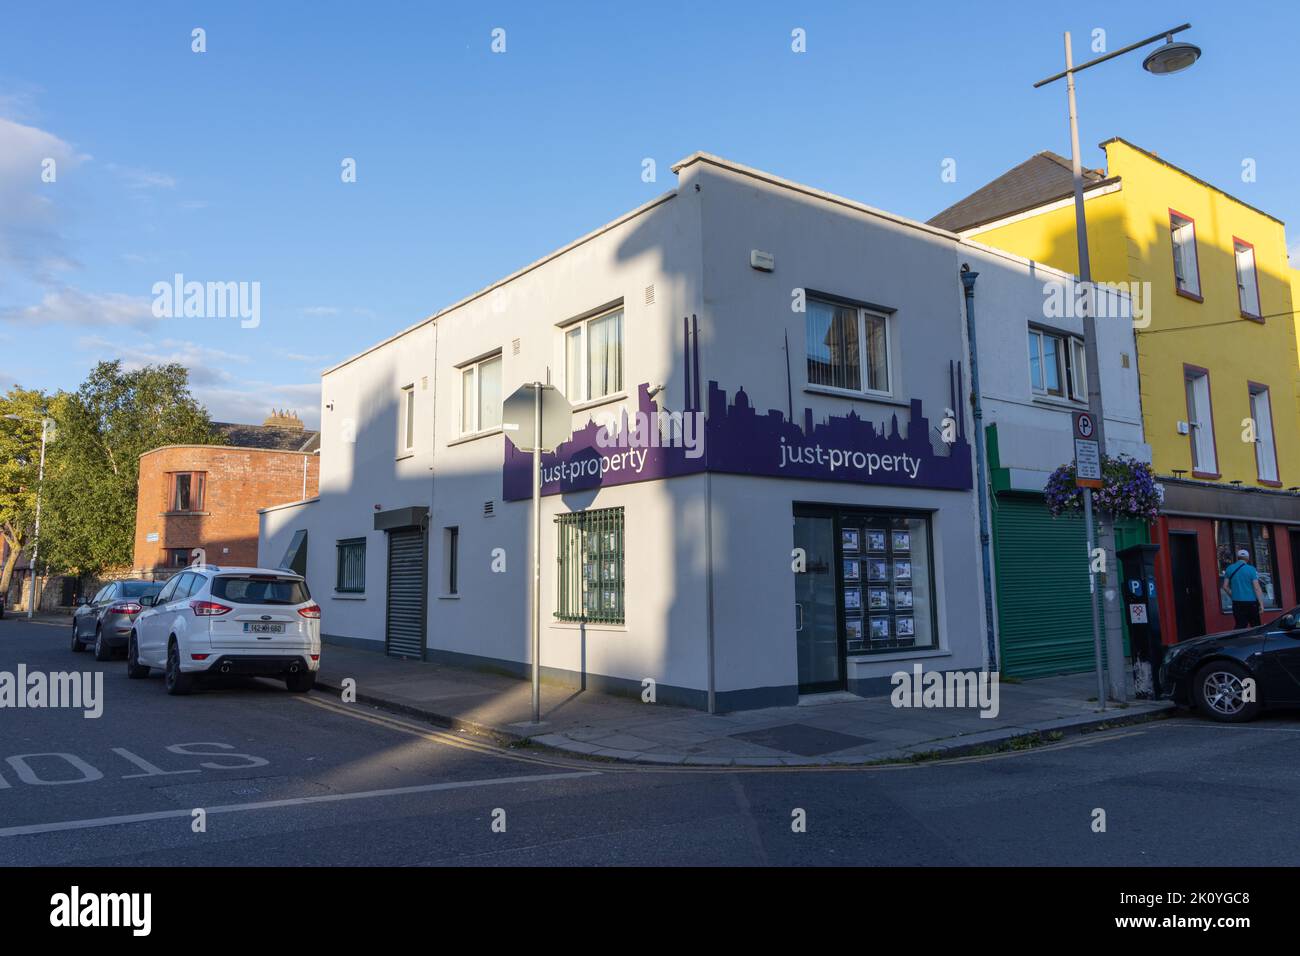 The building of the Property Renting Agency in pastel colors at the street corner in Dublin. Stock Photo